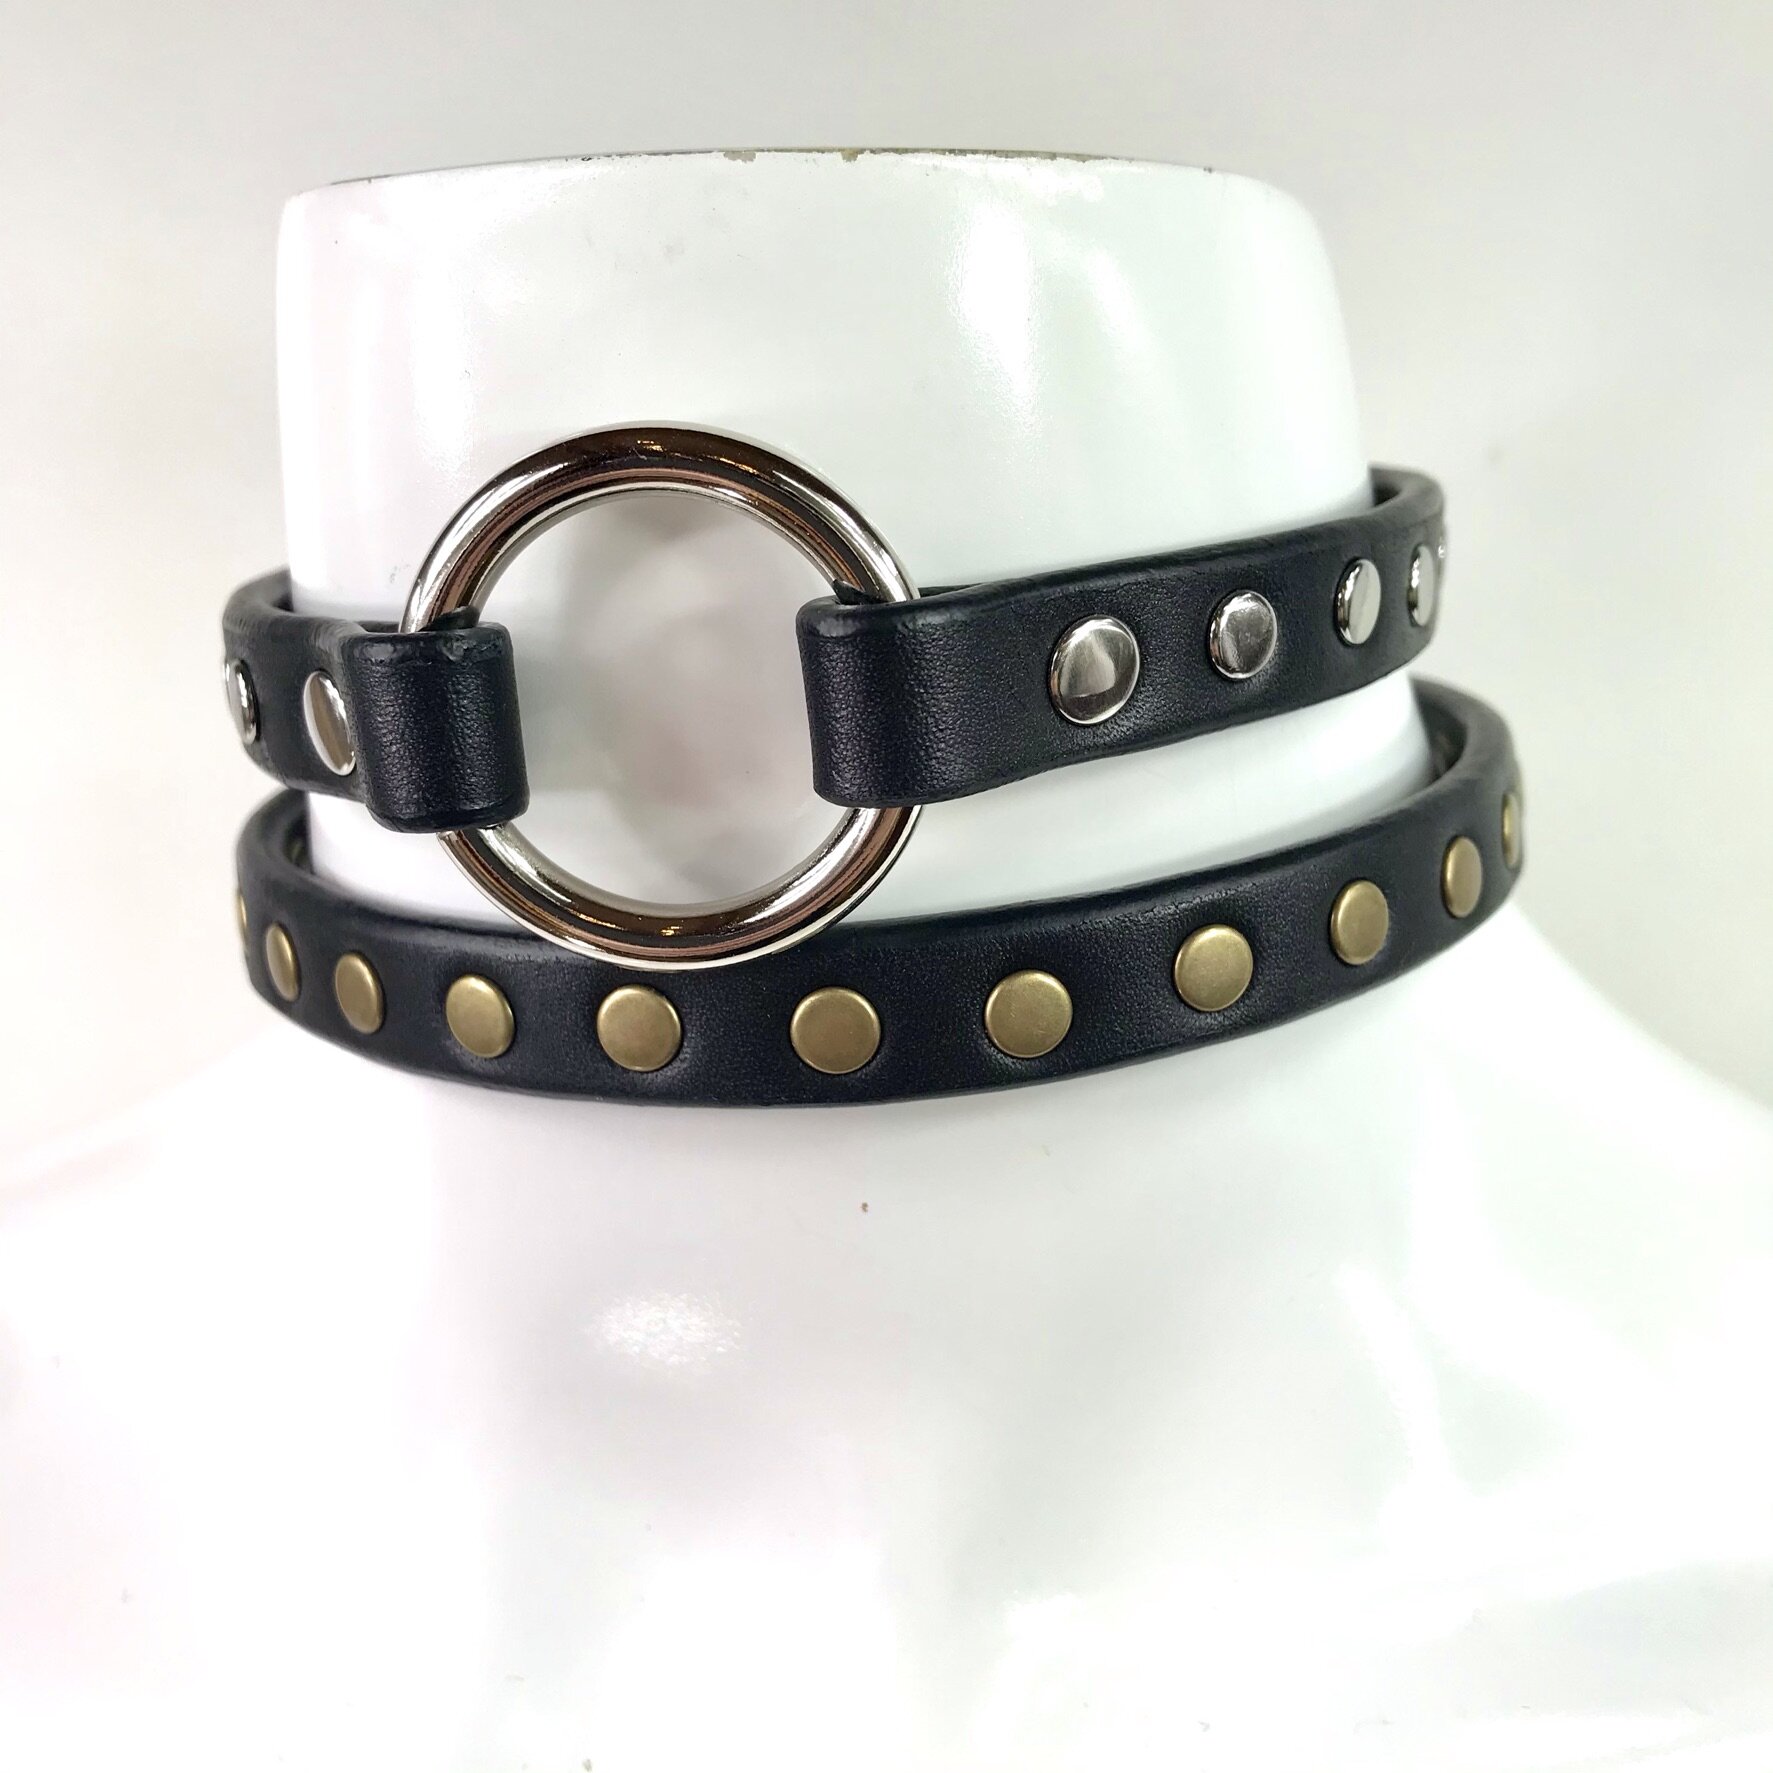 Red Leather SPIKED D-Ring COLLAR choker studded spike studded RATS BUM 